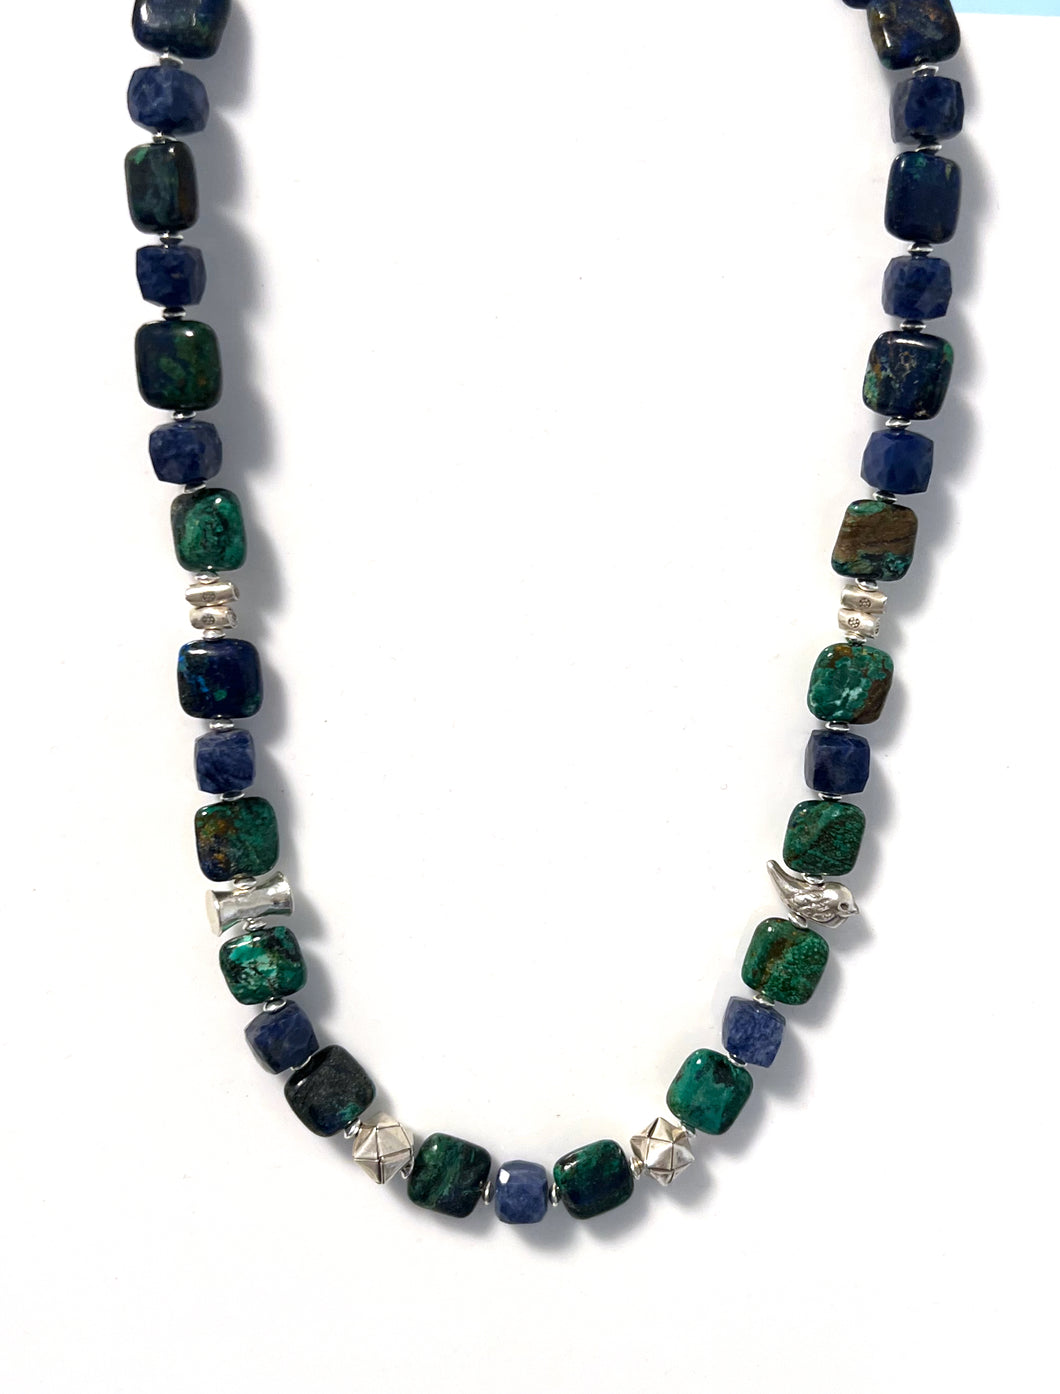 Australian Handmade Blue Necklace with Azurite with Malachite Lapis Lazuli and Sterling Silver